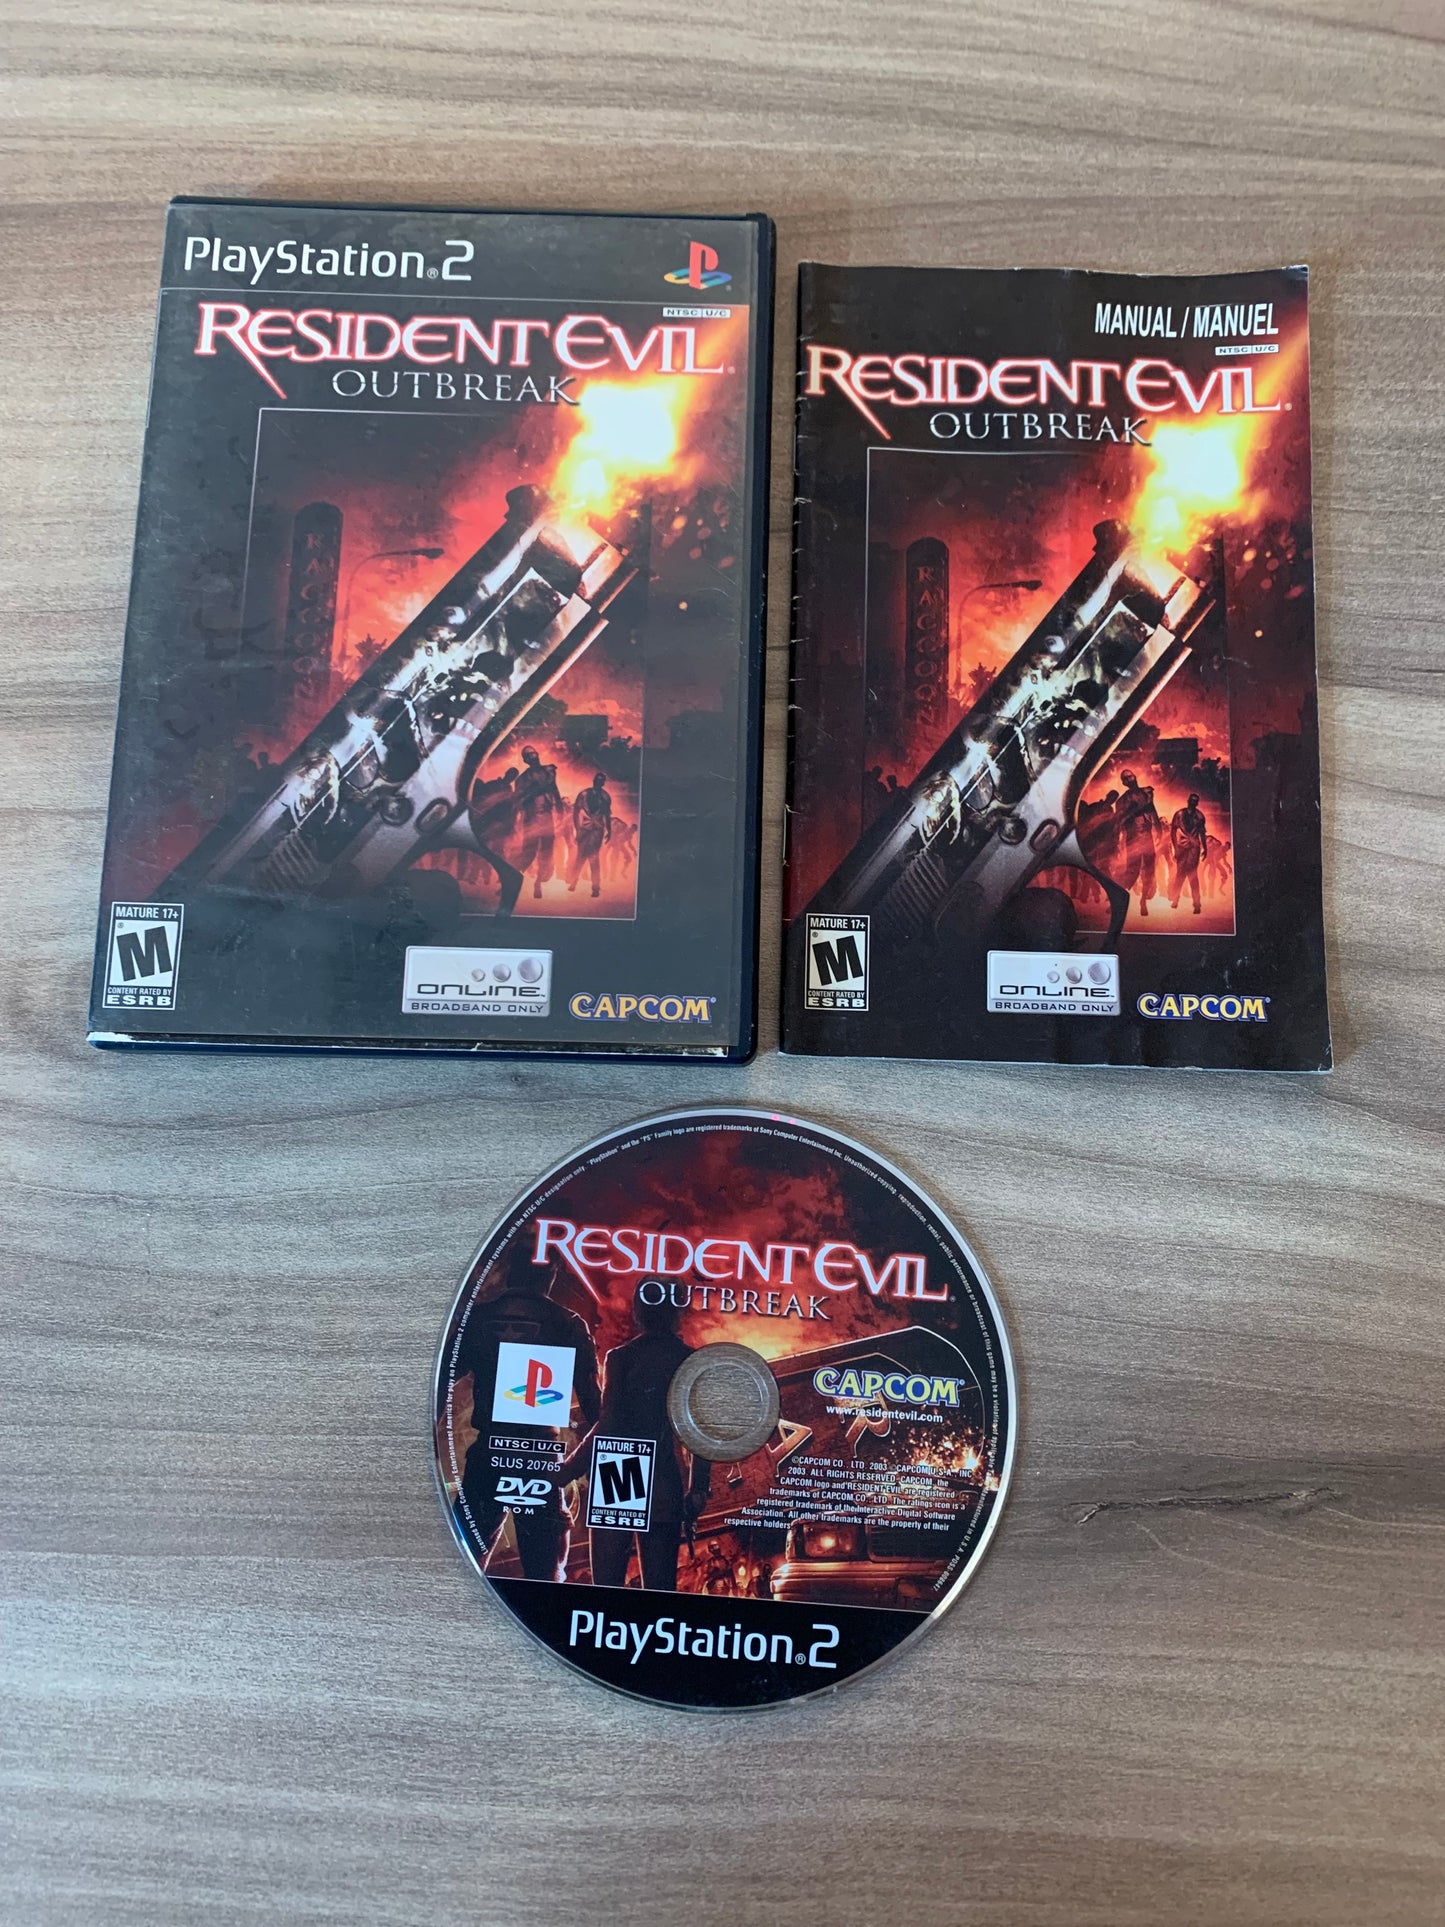 PiXEL-RETRO.COM : SONY PLAYSTATION 2 (PS2) COMPLET CIB BOX MANUAL GAME NTSC RESIDENT EVIL OUTBREAK